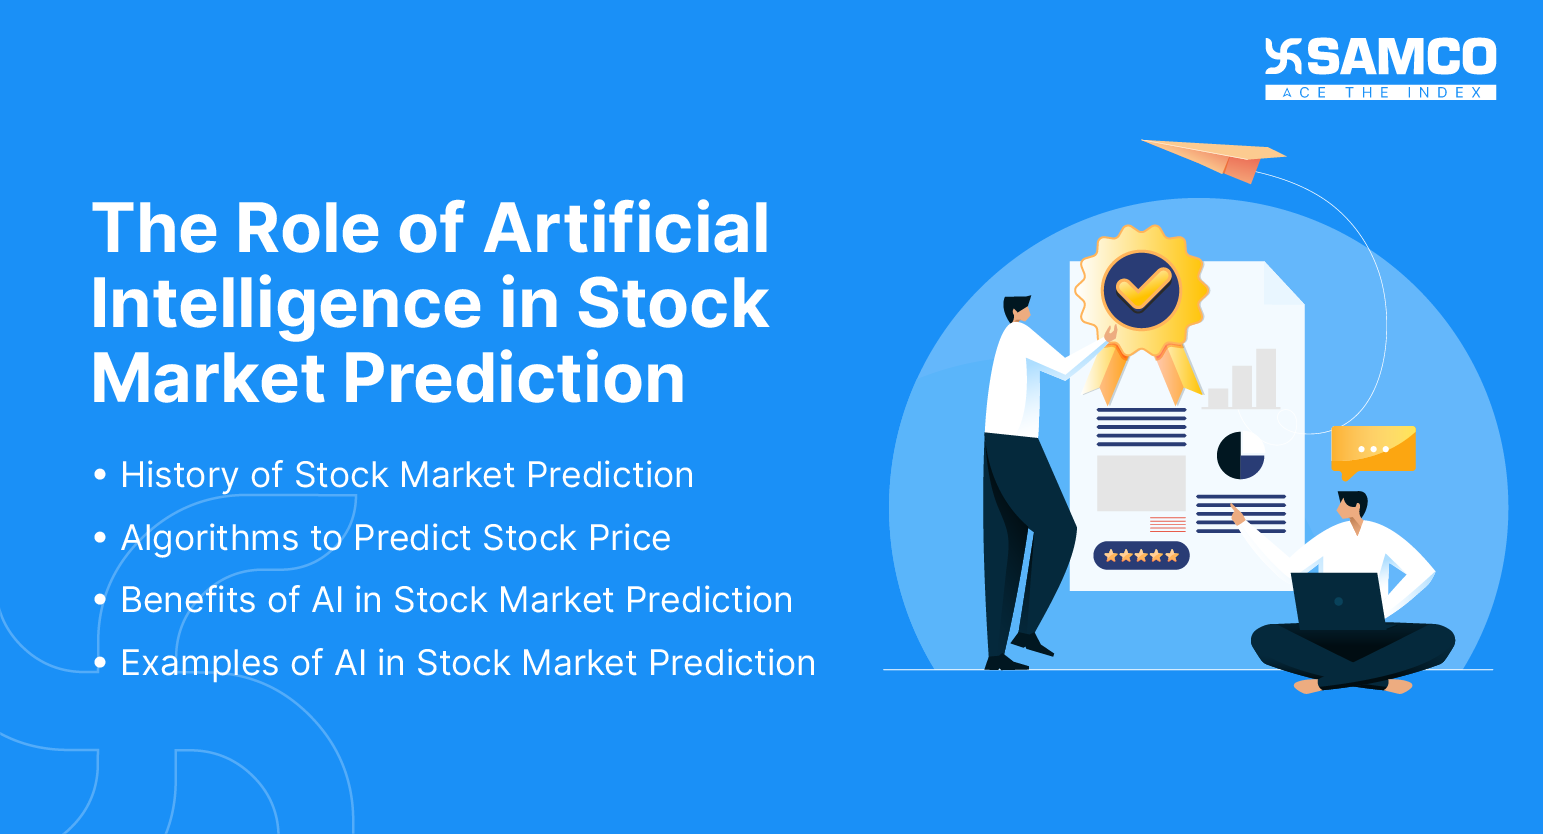 The Role of Artificial Intelligence in Stock Market Prediction Samco